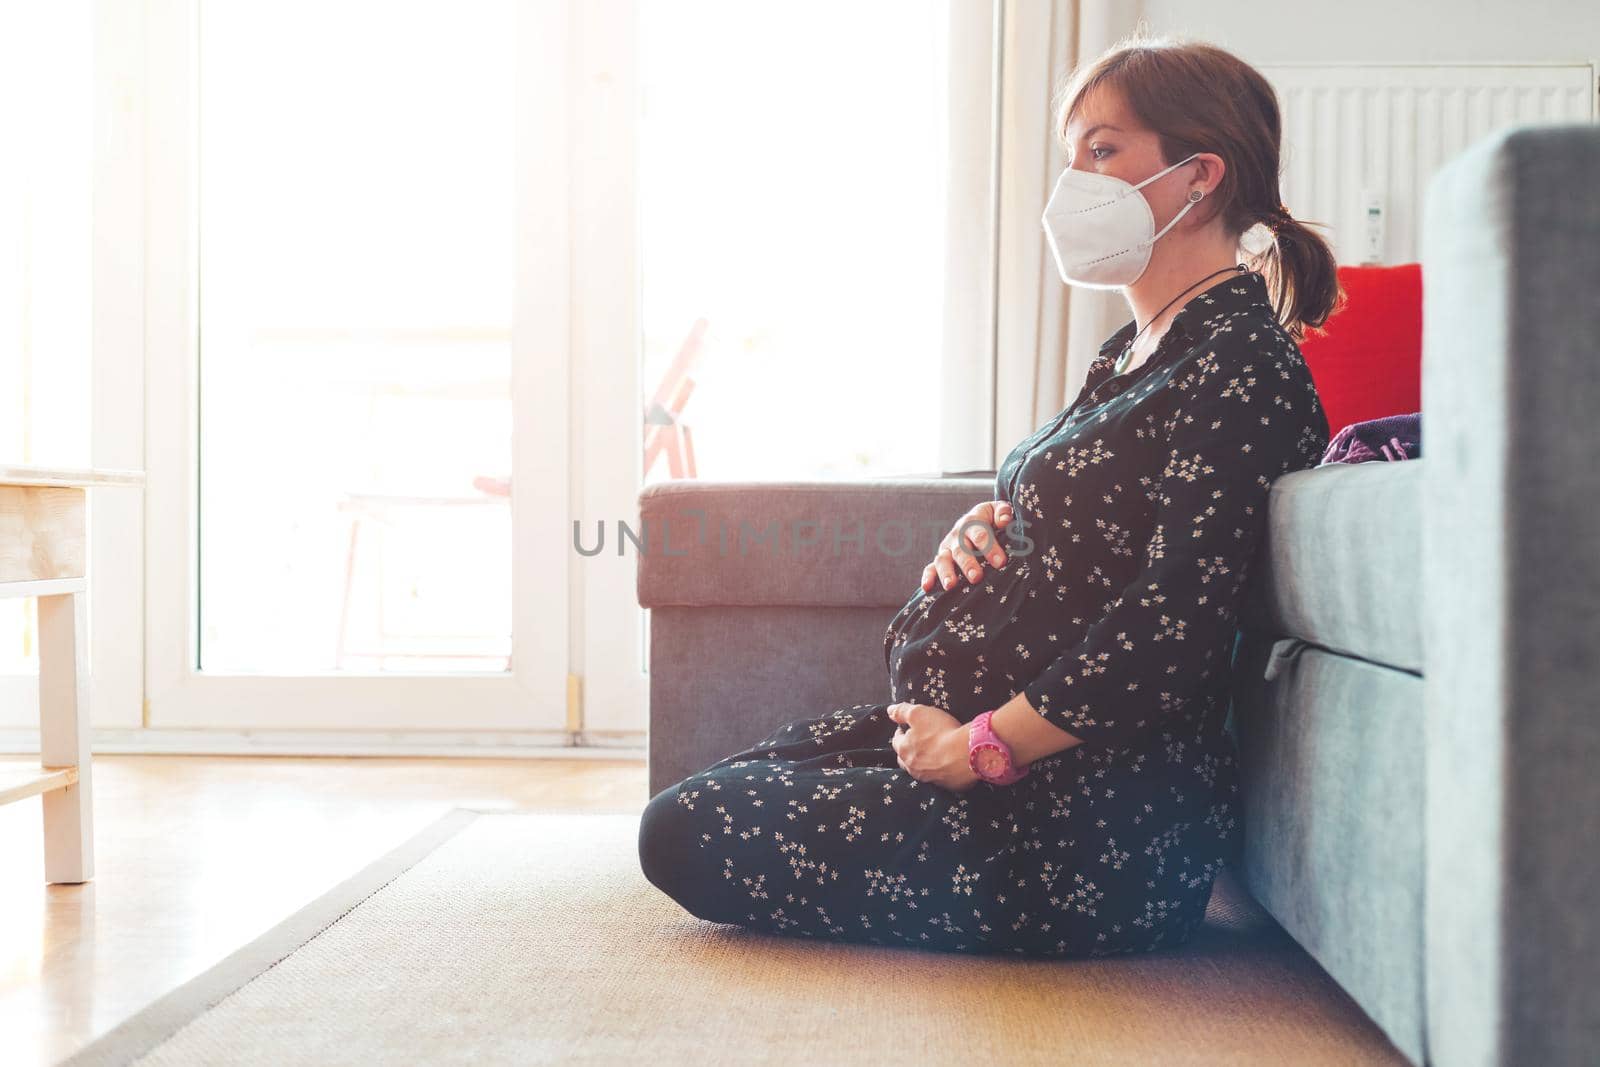 Pregnant woman with ffp2 face mask is sitting on the floor.